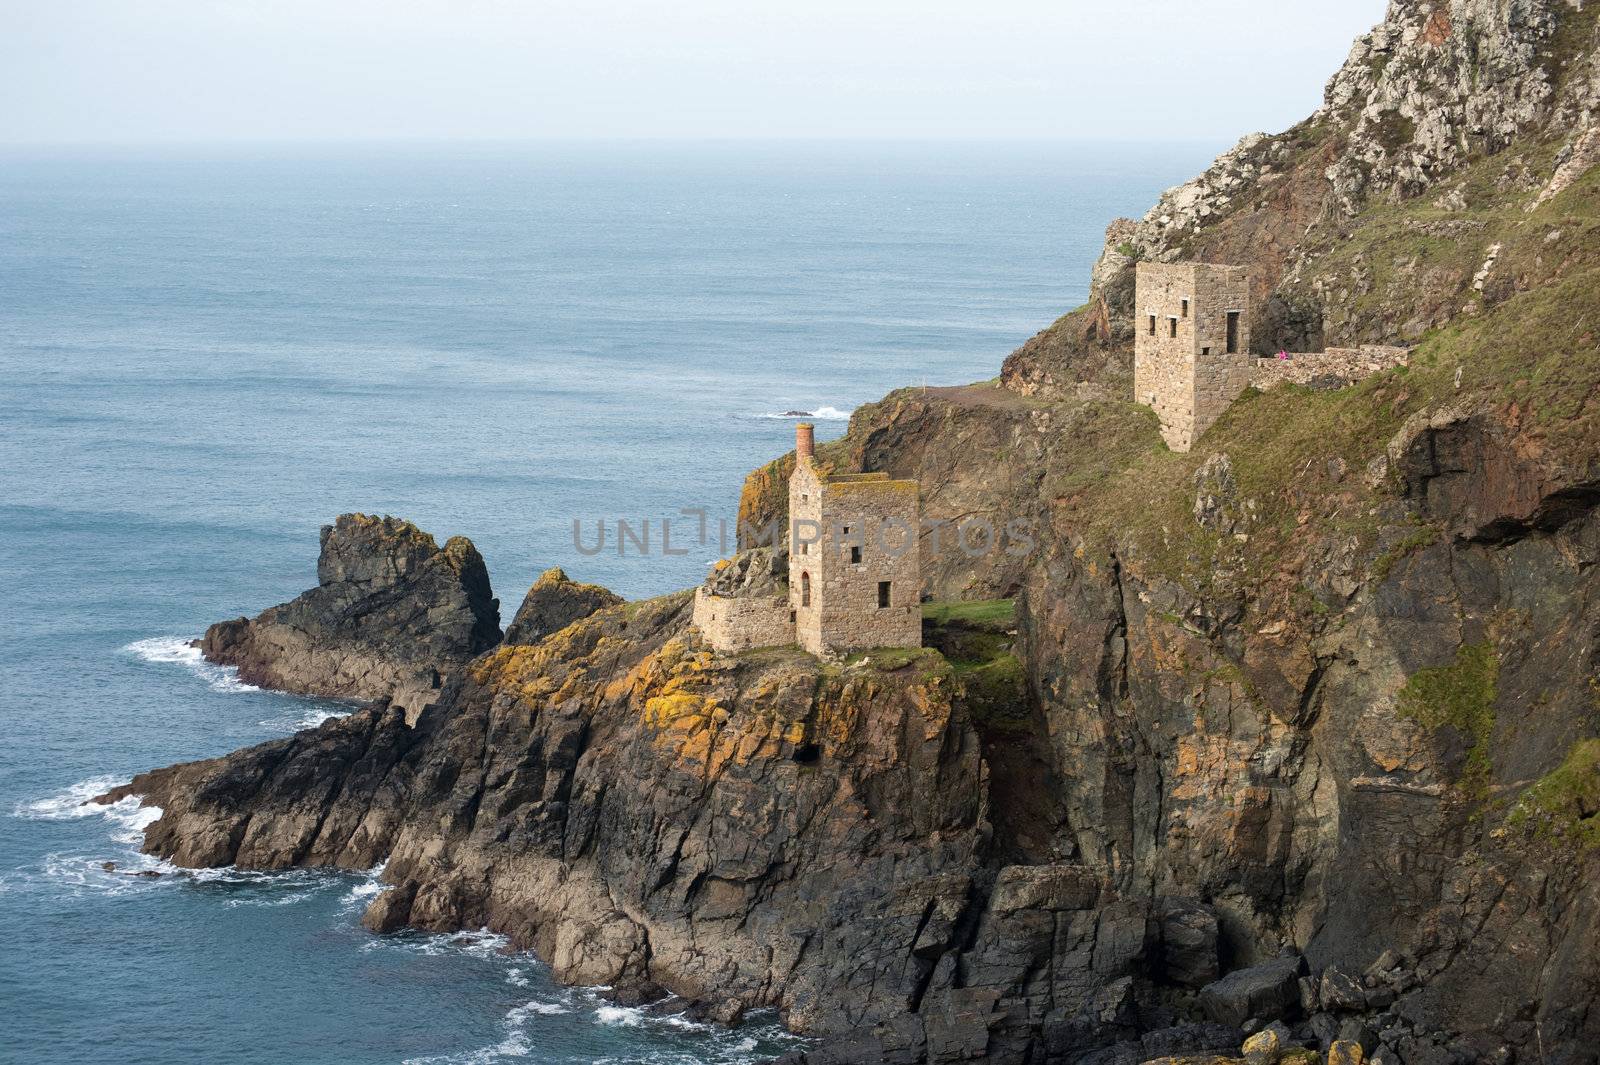 Crown Mines ruins, Botallack, Cornwall, with the remnants of the two stone engine houses perched on the cliffs overlooking the Atlantic ocean